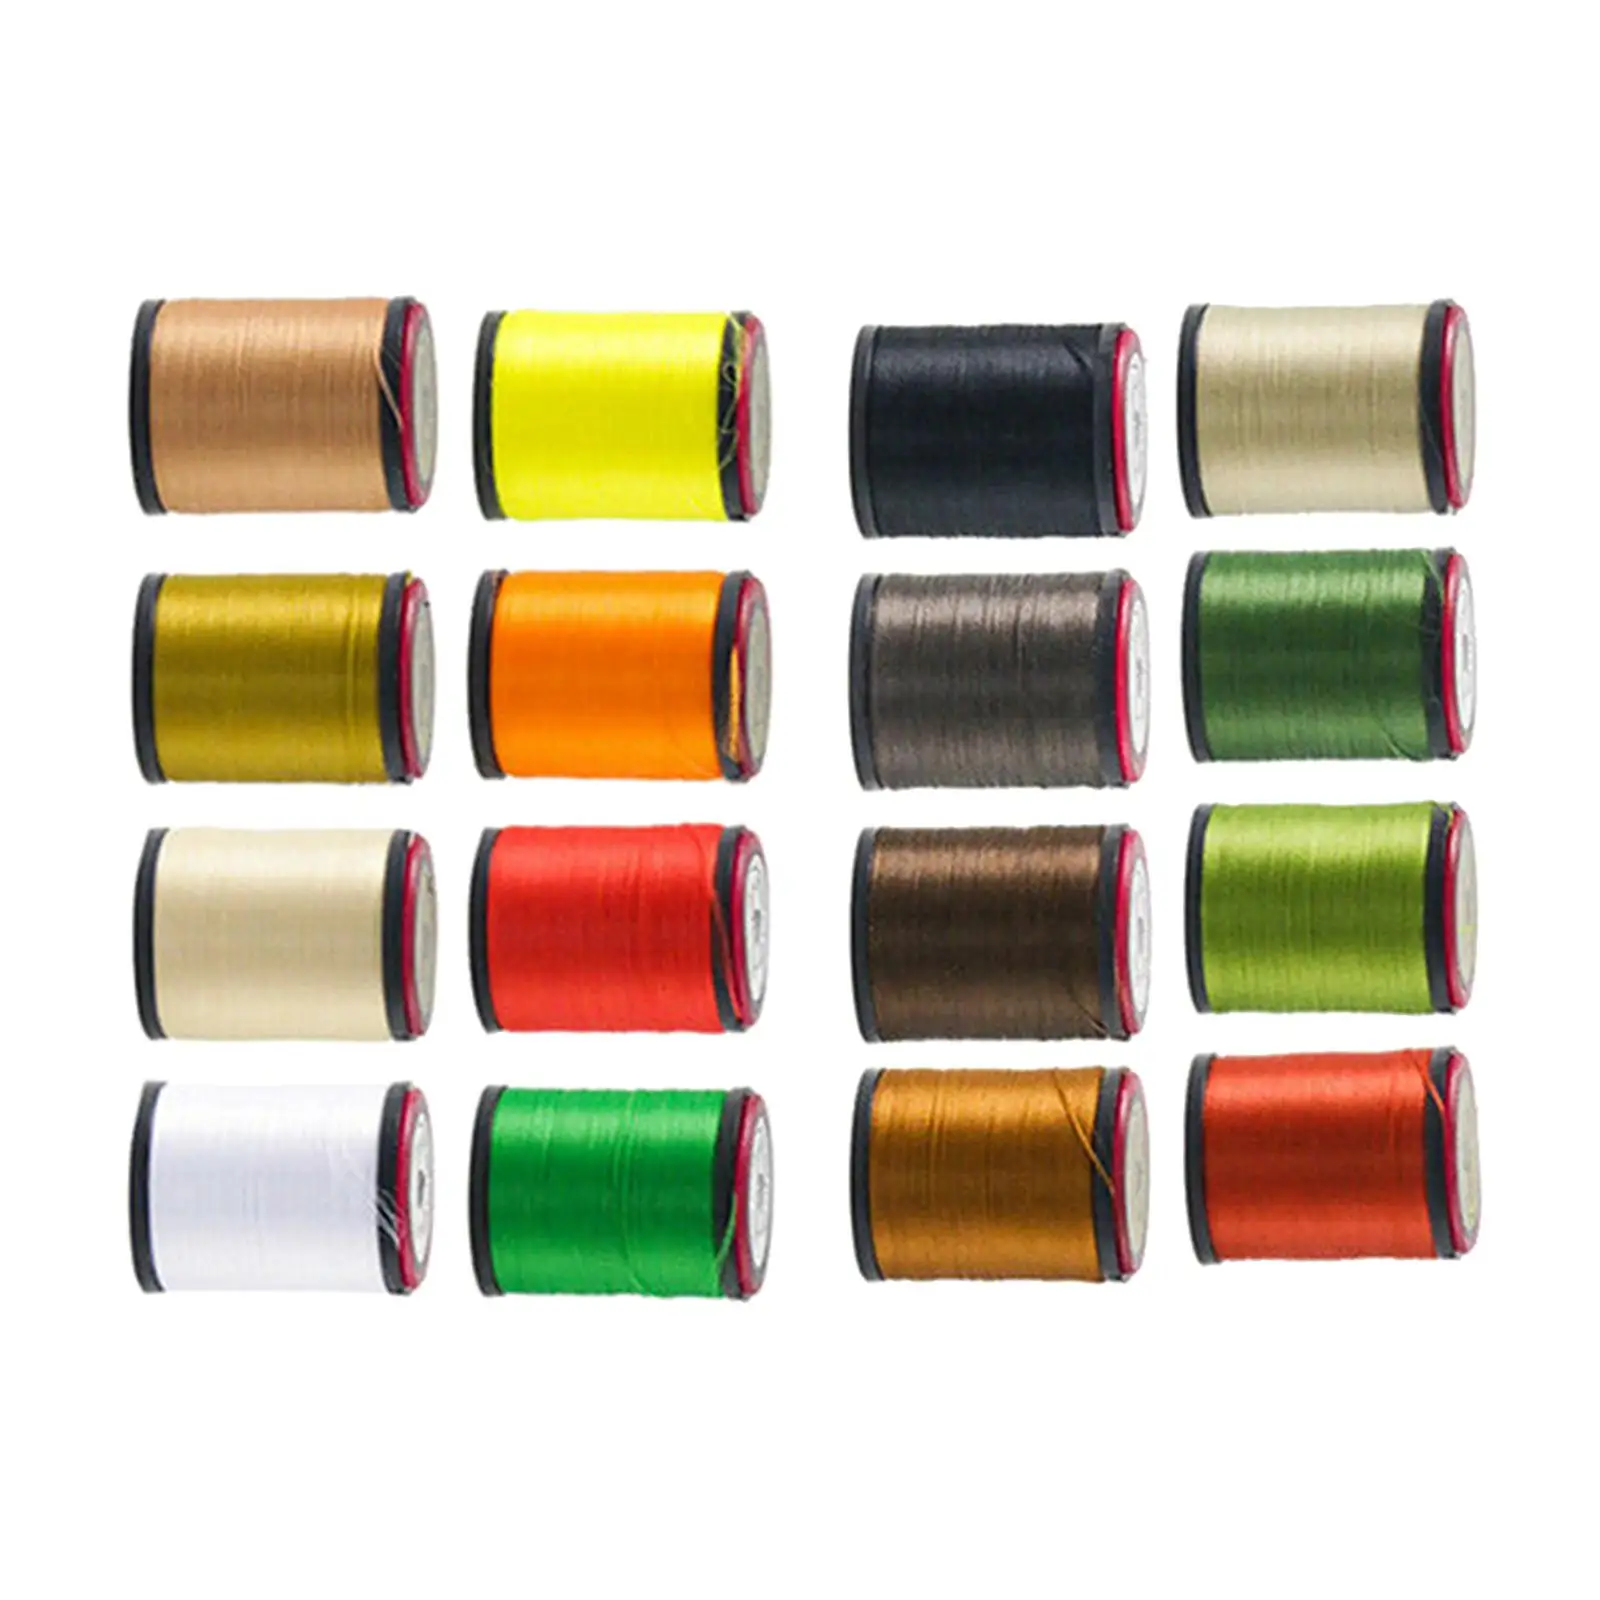 Fly Tying Thread Fly Tying Materials Supplies Thread Fly Fishing Fly Tieing